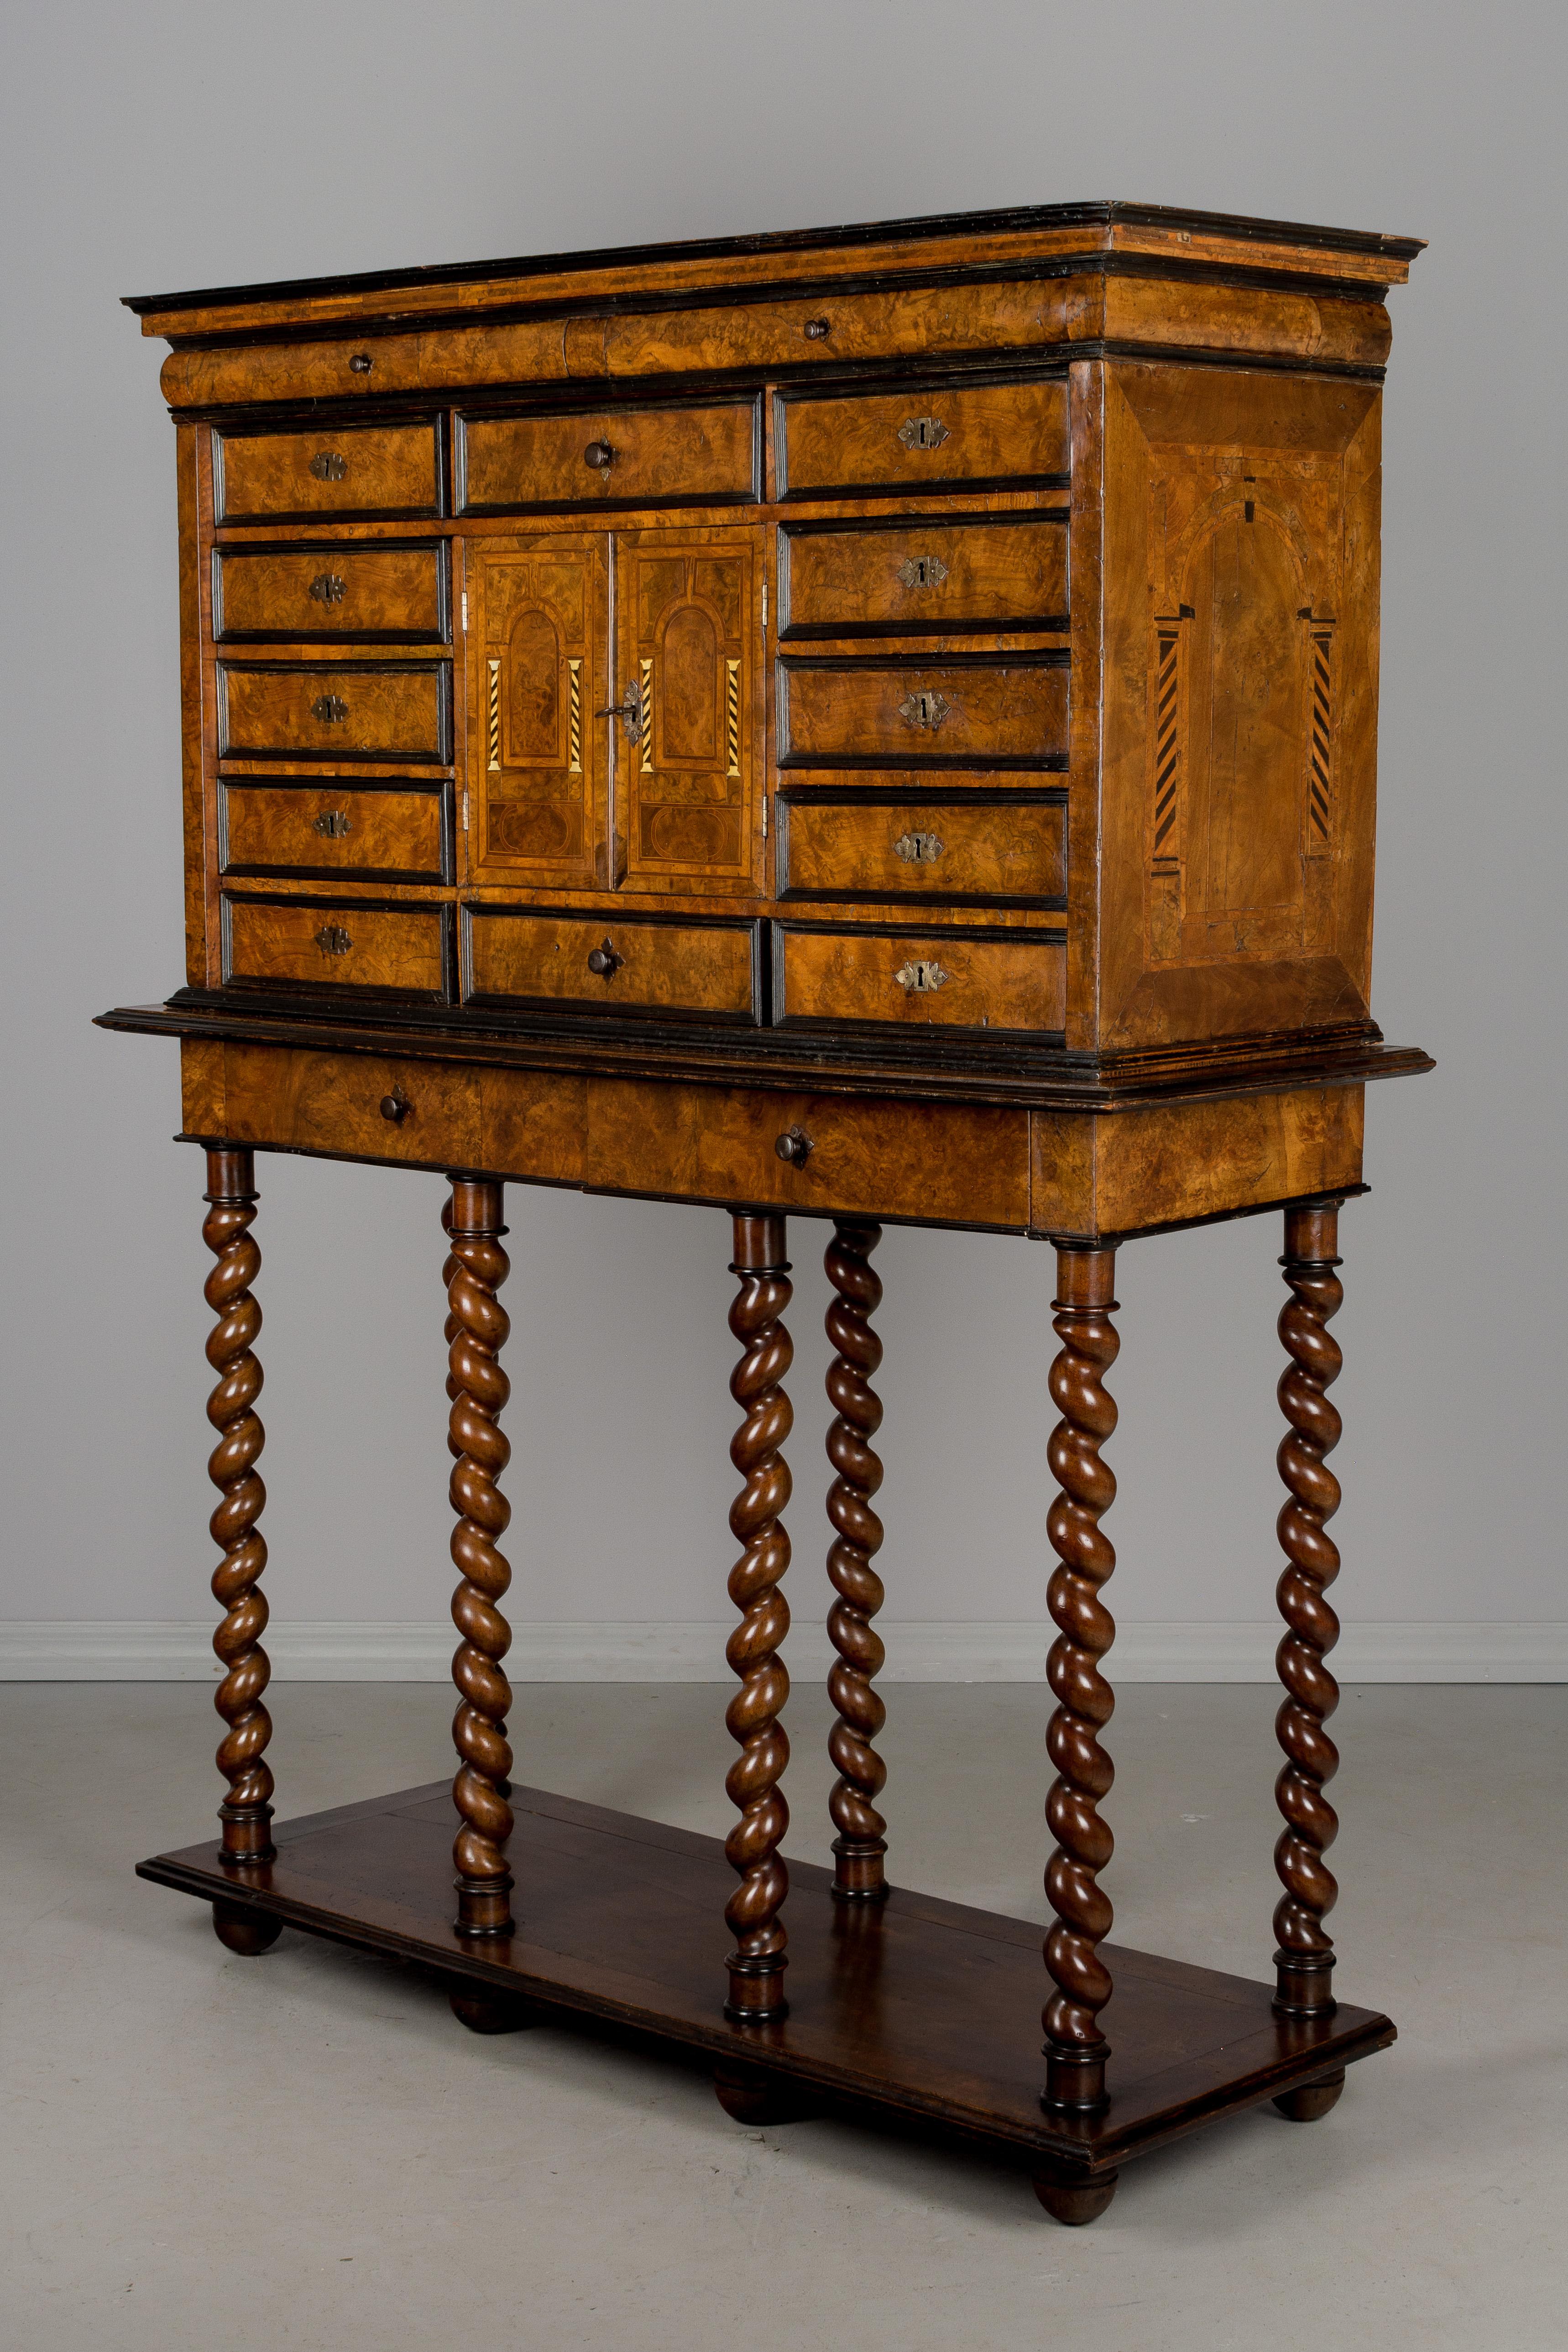 An magnificent 18th century Italian marquetry vargueno, or chest on a stand. The chest is made of burl of walnut veneer on pine with various wood inlay and ebonized trim and has 14 drawers, 4 with small iron knobs and 10 with locks. Two small